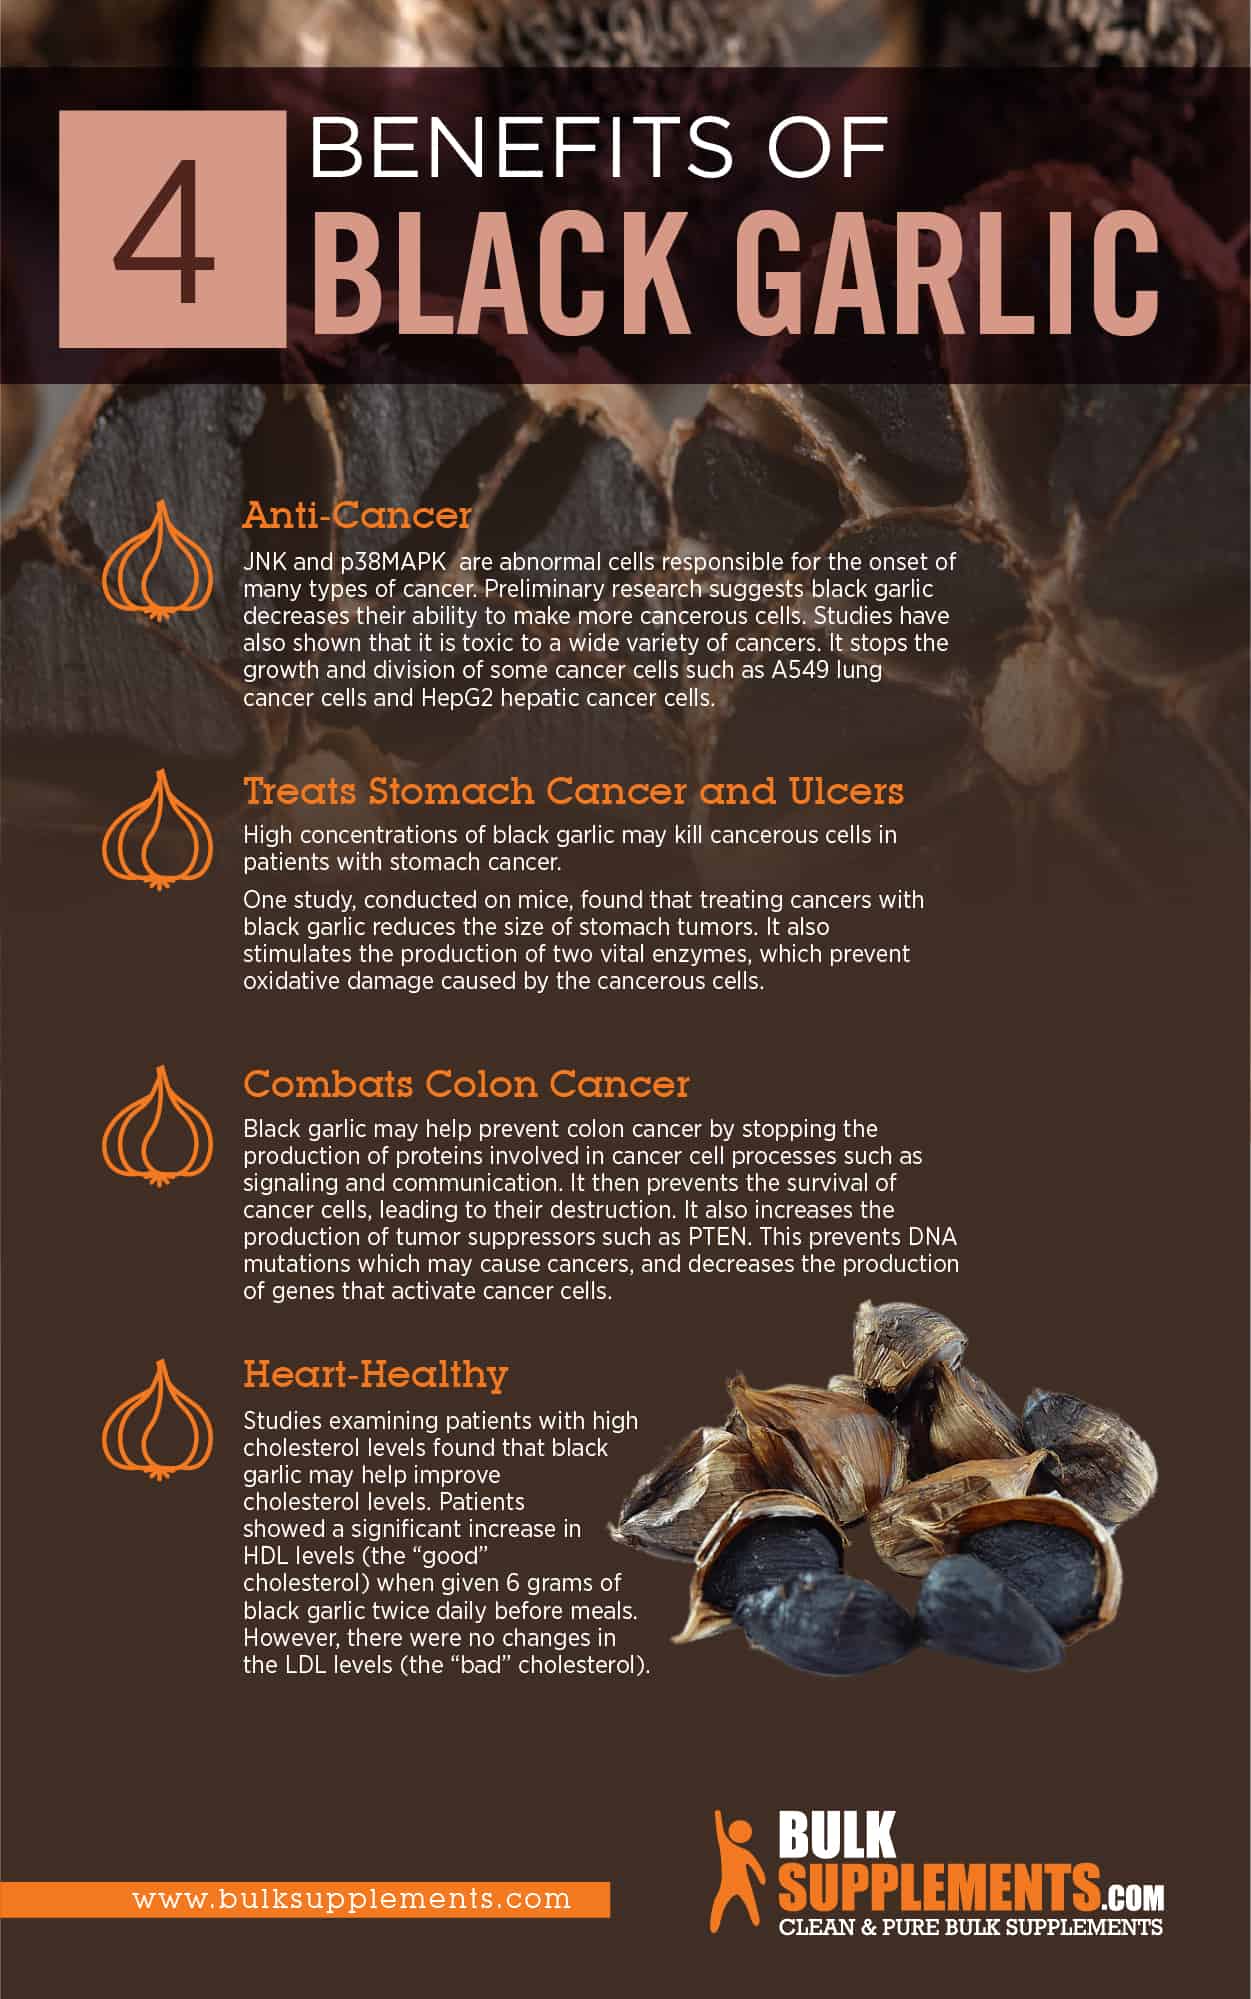 black garlic benefits, side effects, and dosage